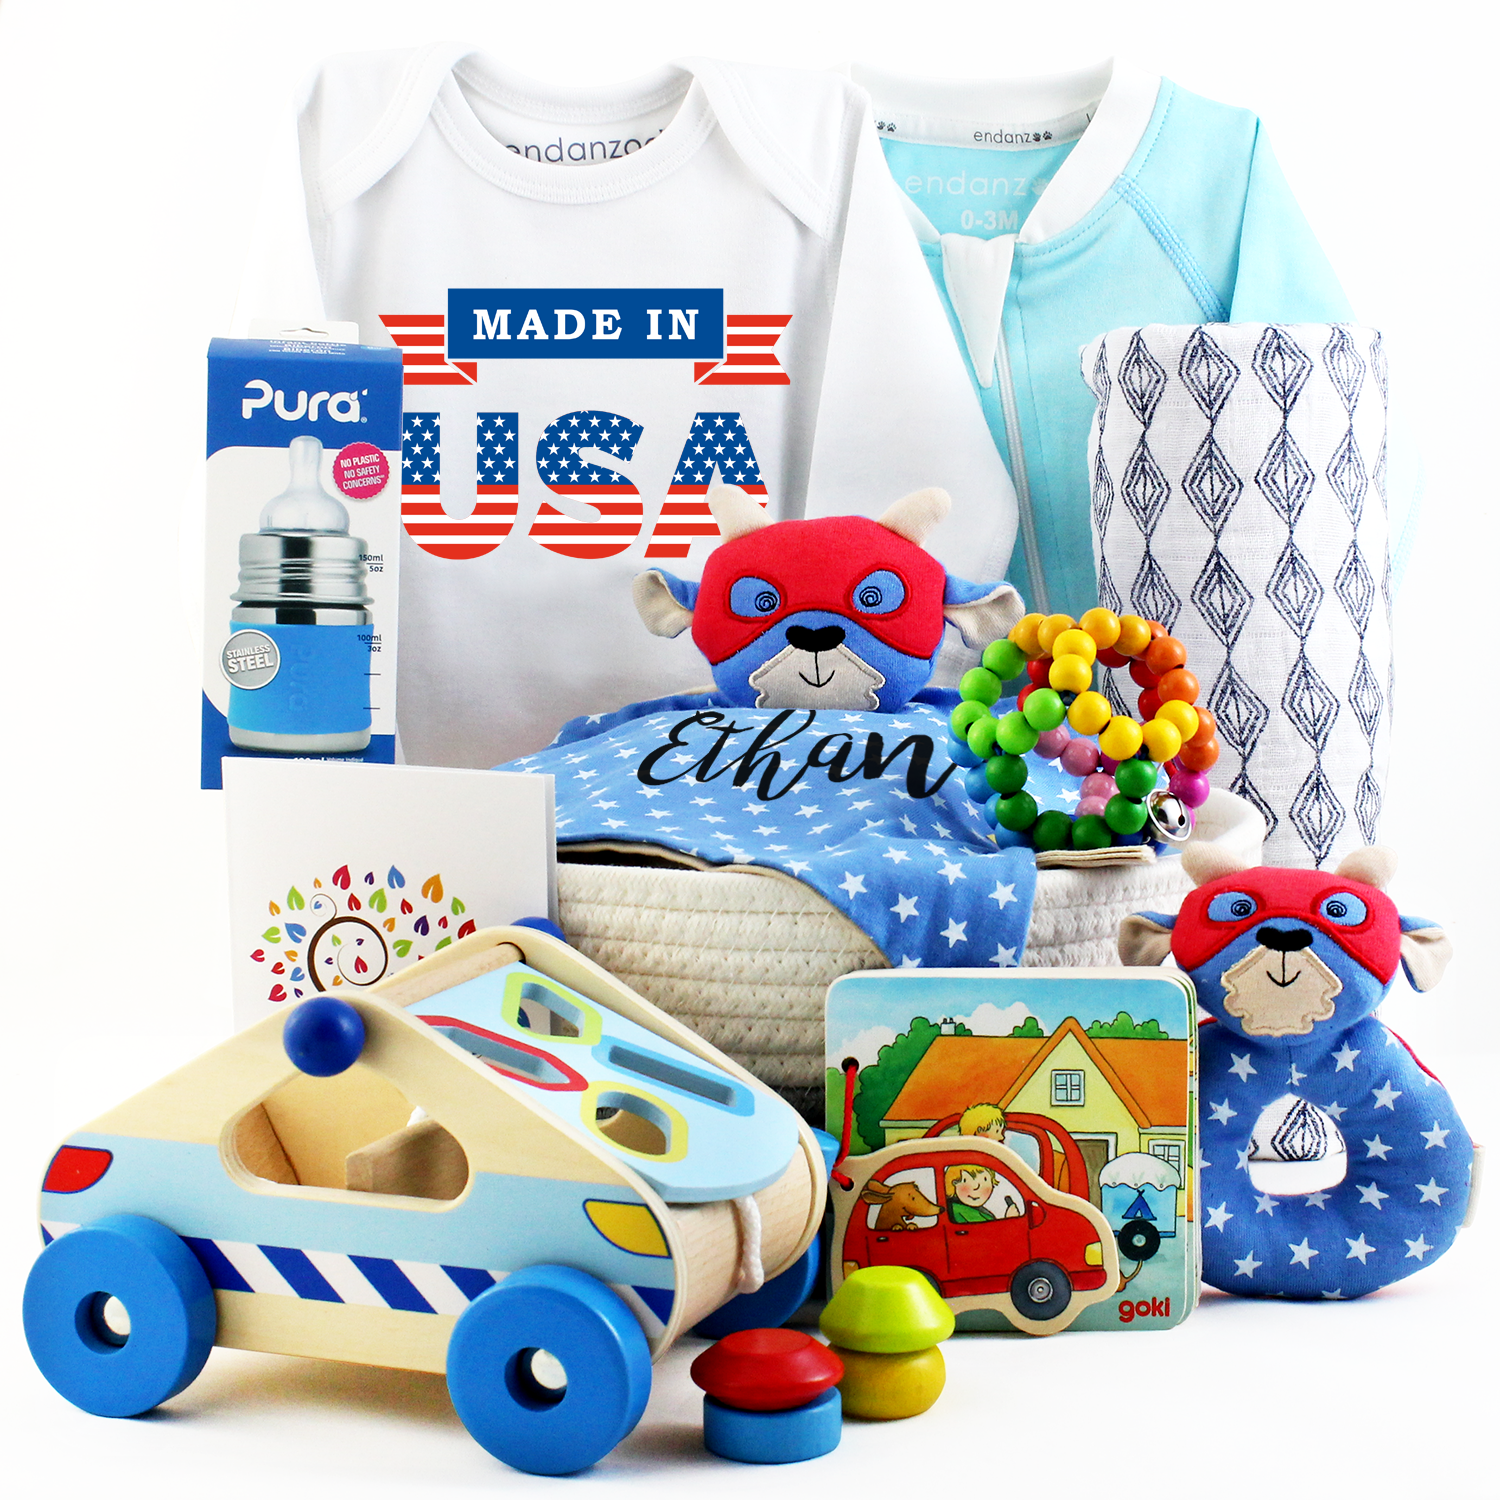 A Special Delivery New Baby Gift Basket – Blue –